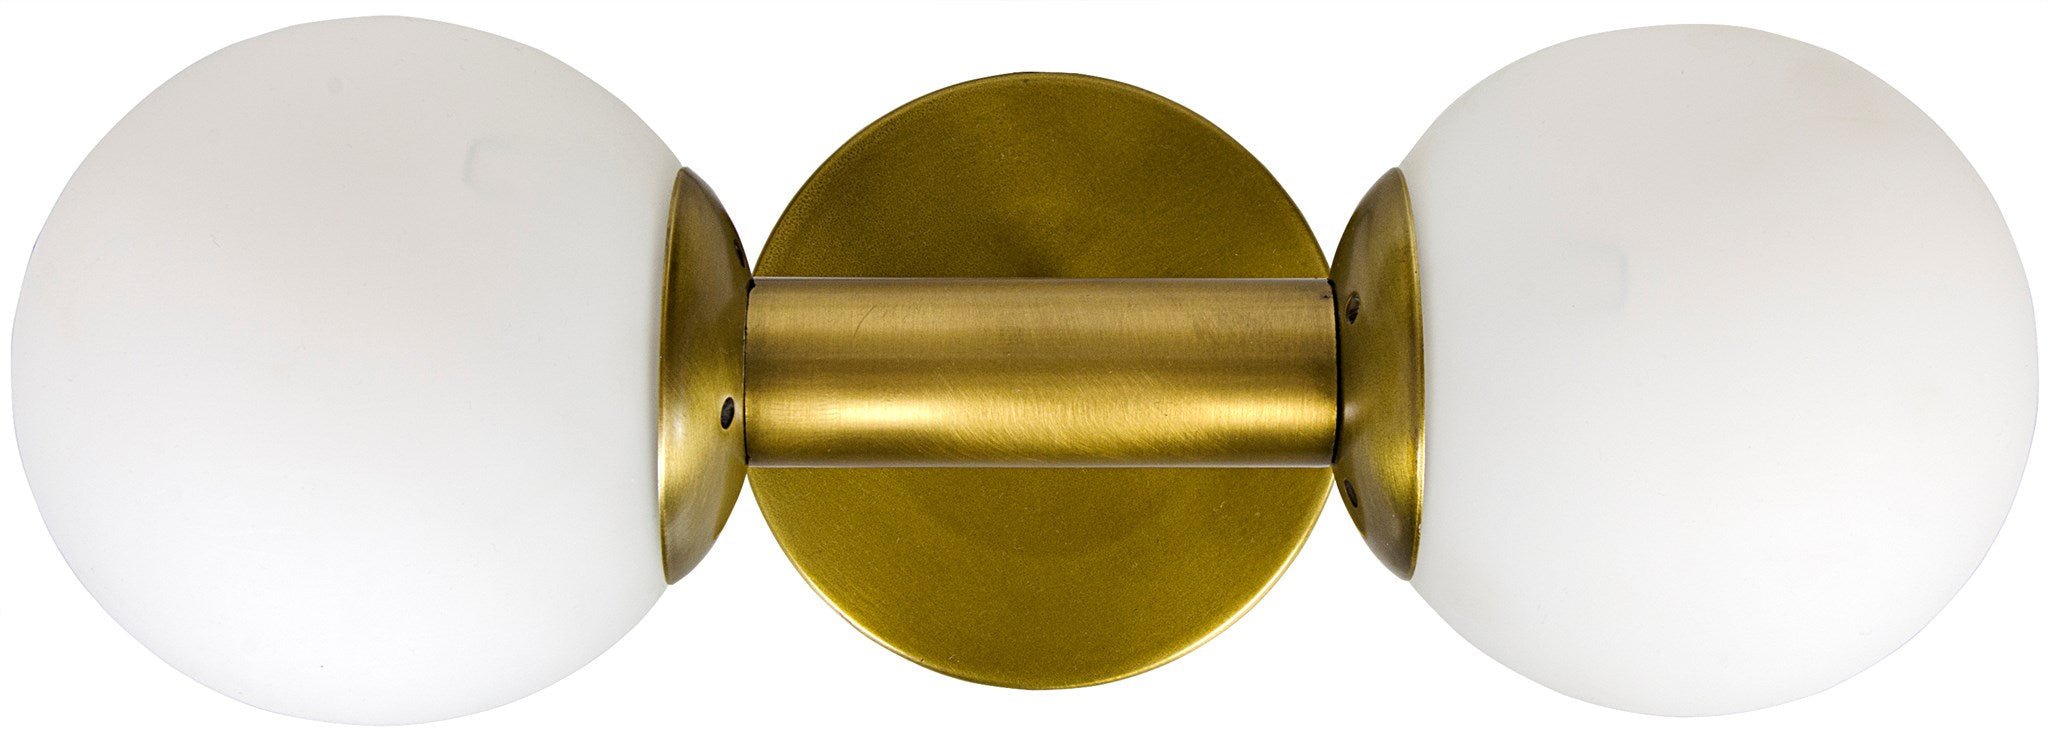 Antiope Sconce, Antique Brass, Metal and Glass - Decor - Tipplergoods